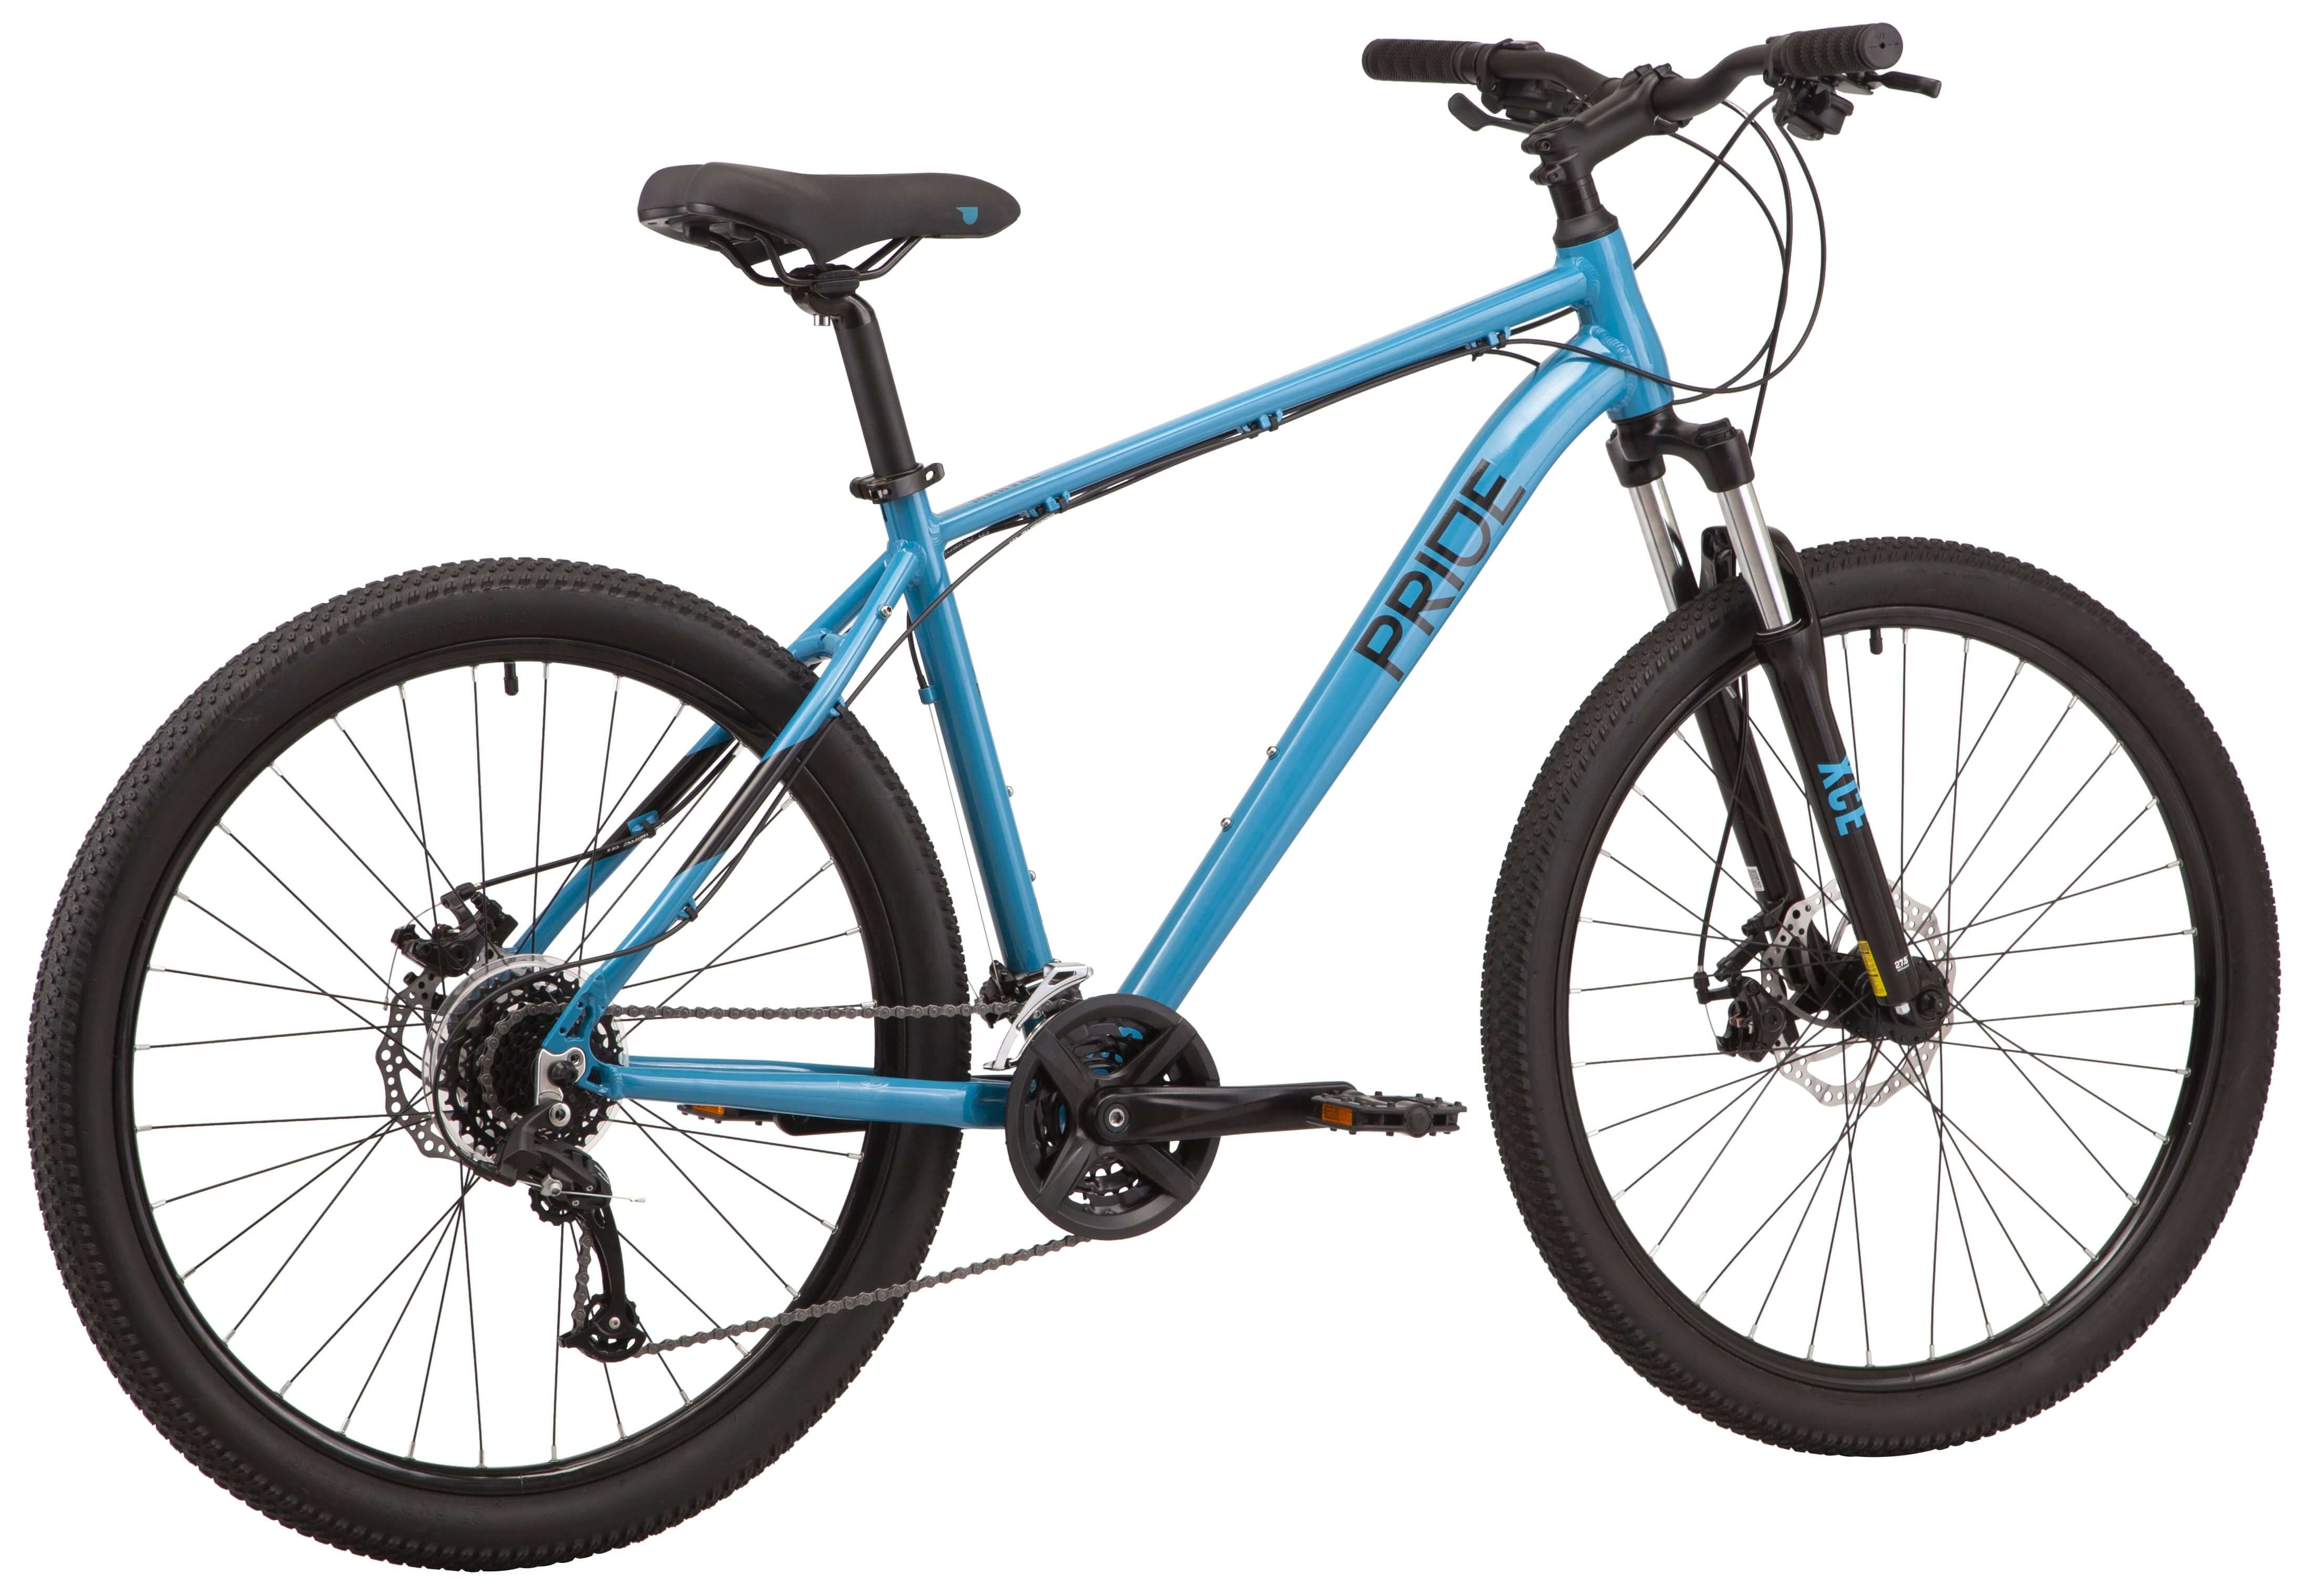 27.5" PRIDE MARVEL 7.2 frame - M 2022 turquoise (rear and front switches and tamnet - Microshift) Photo 3